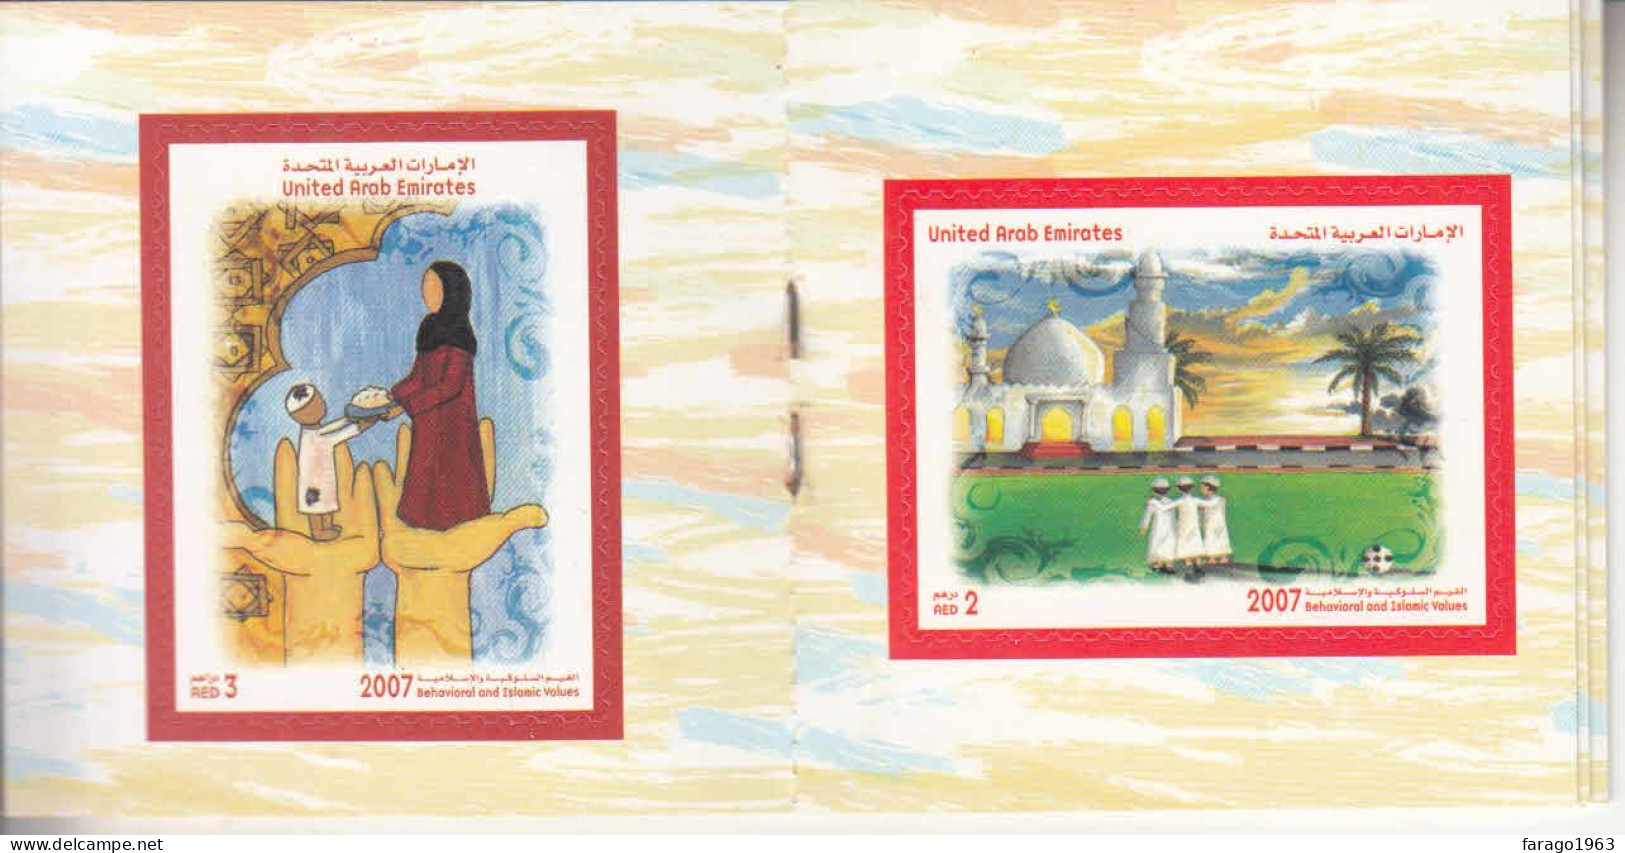 2007 United Arab Emirates Behavioural And Islamic Values Complete Booklet Of 7 MNH - United Arab Emirates (General)